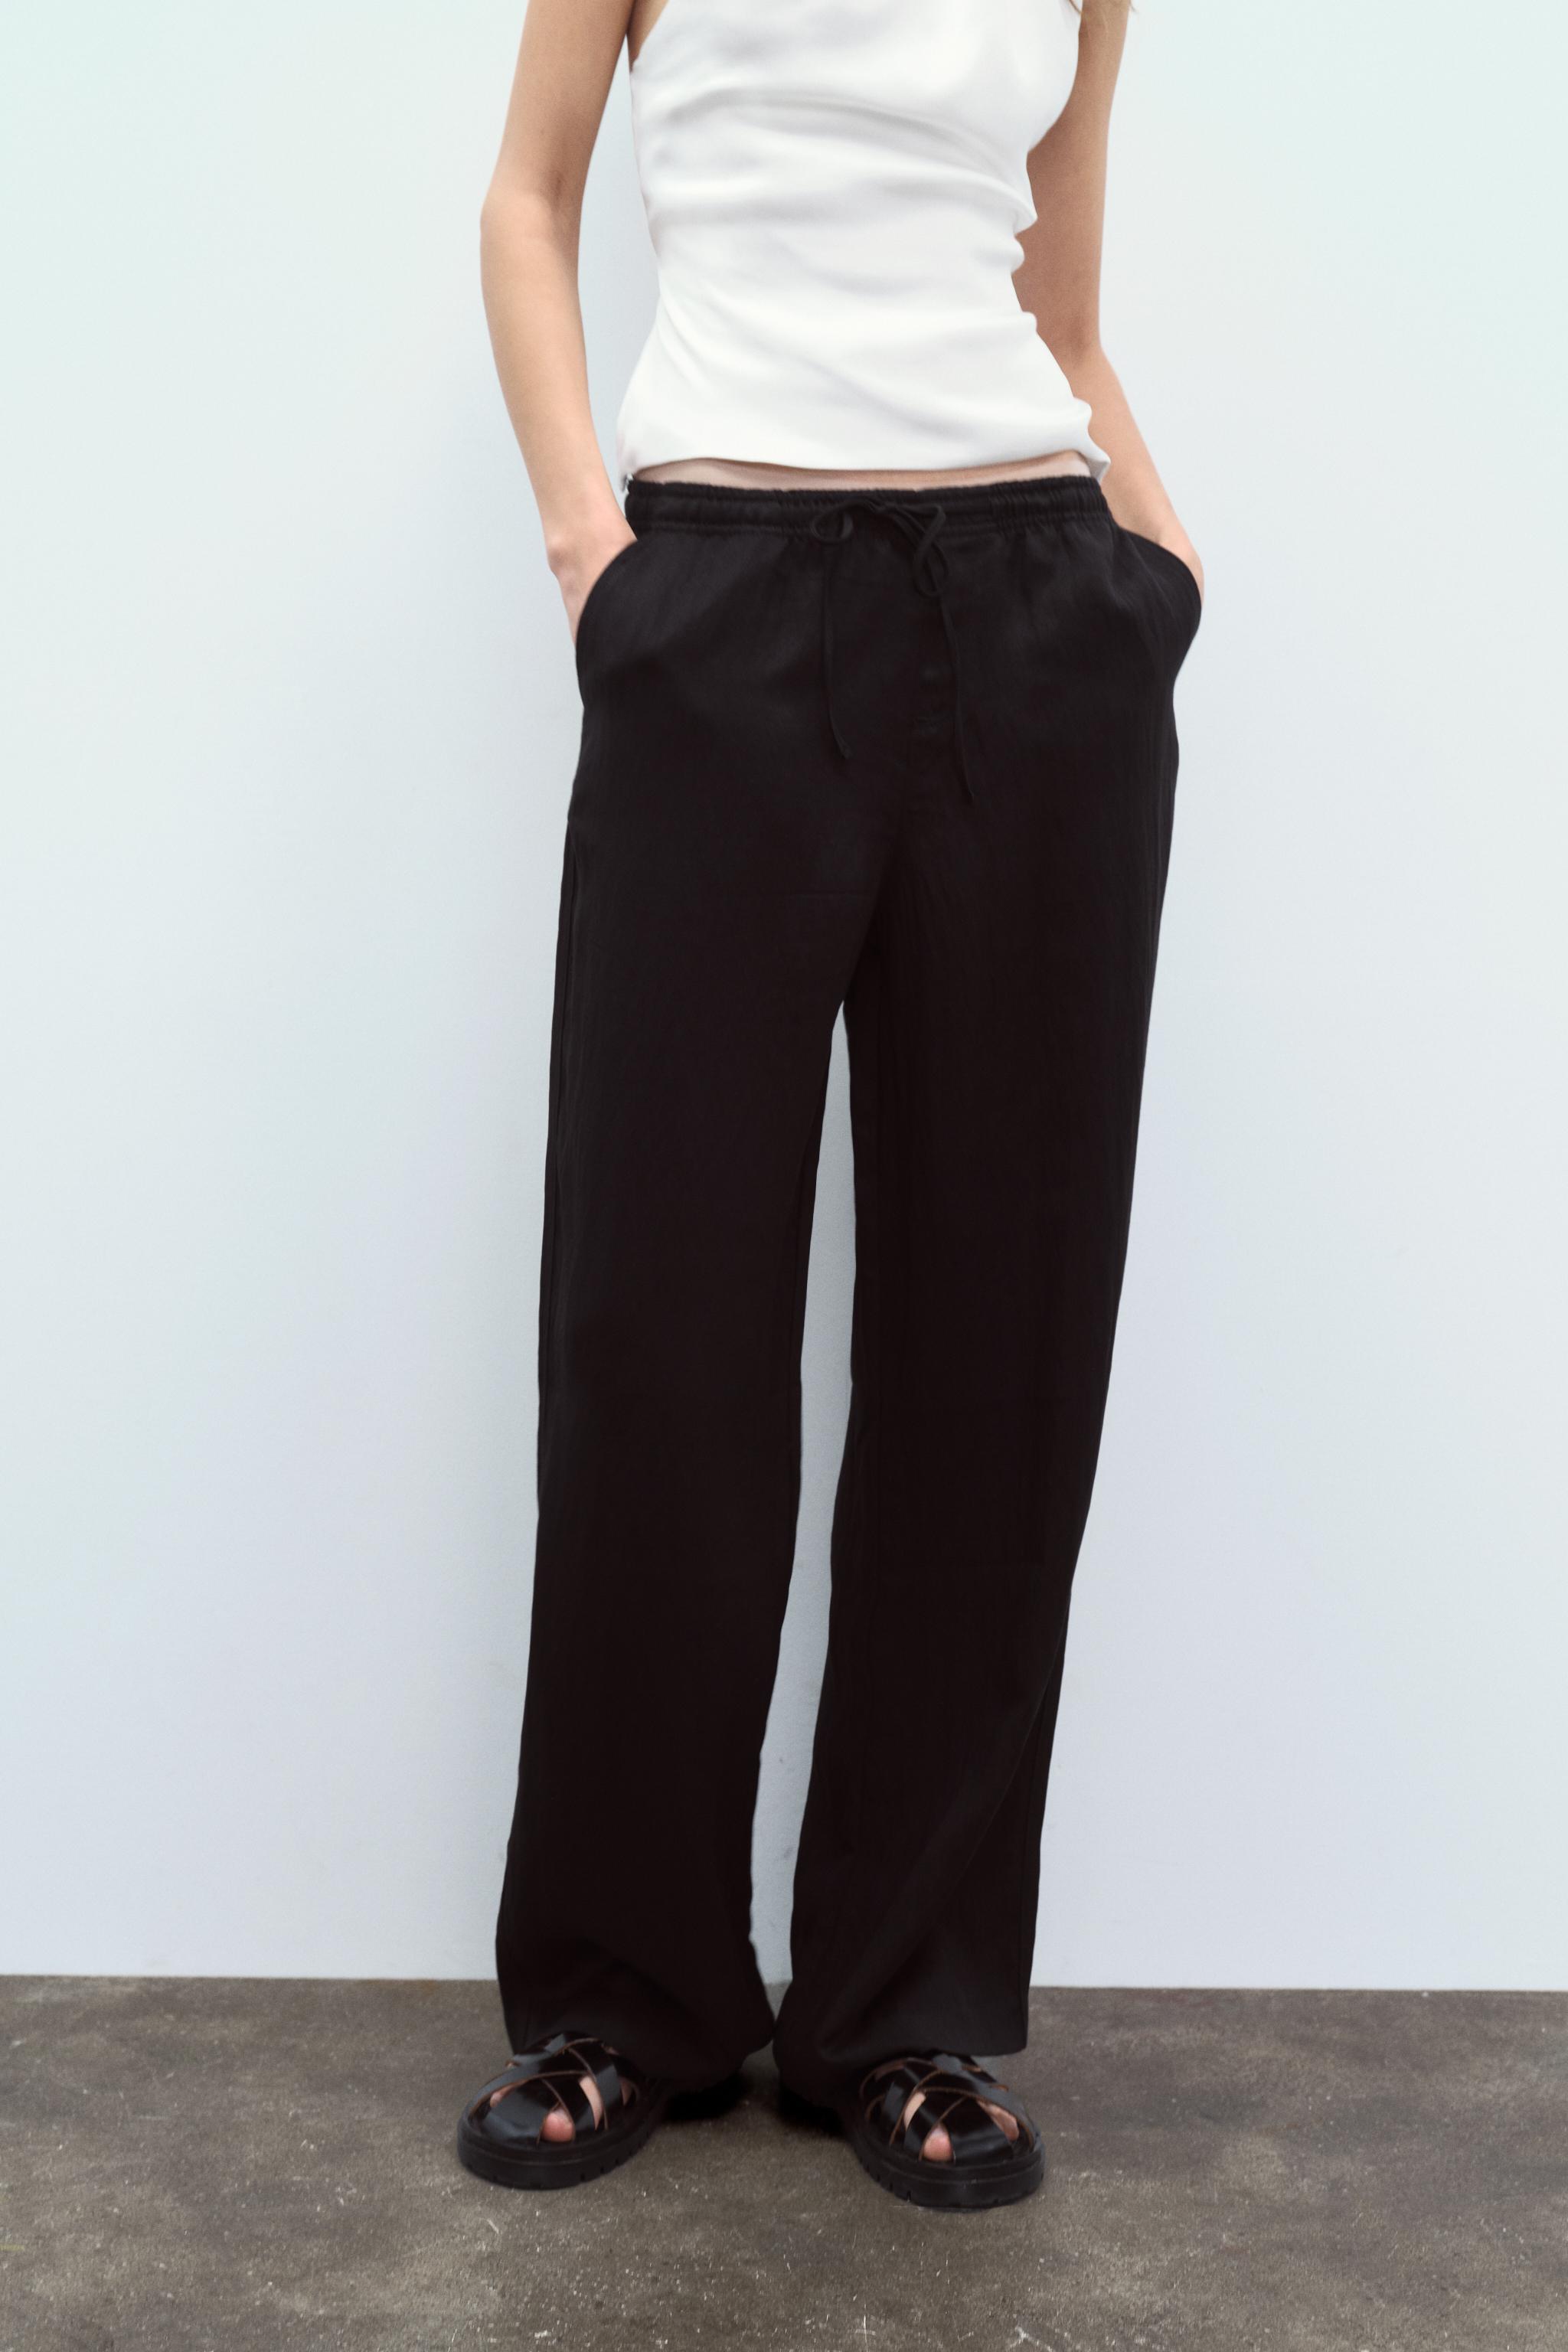 Colourful Pants: Zara Full Length Pants, 11 Tailored Trousers That Might  Just Be Worth a Denim Swap